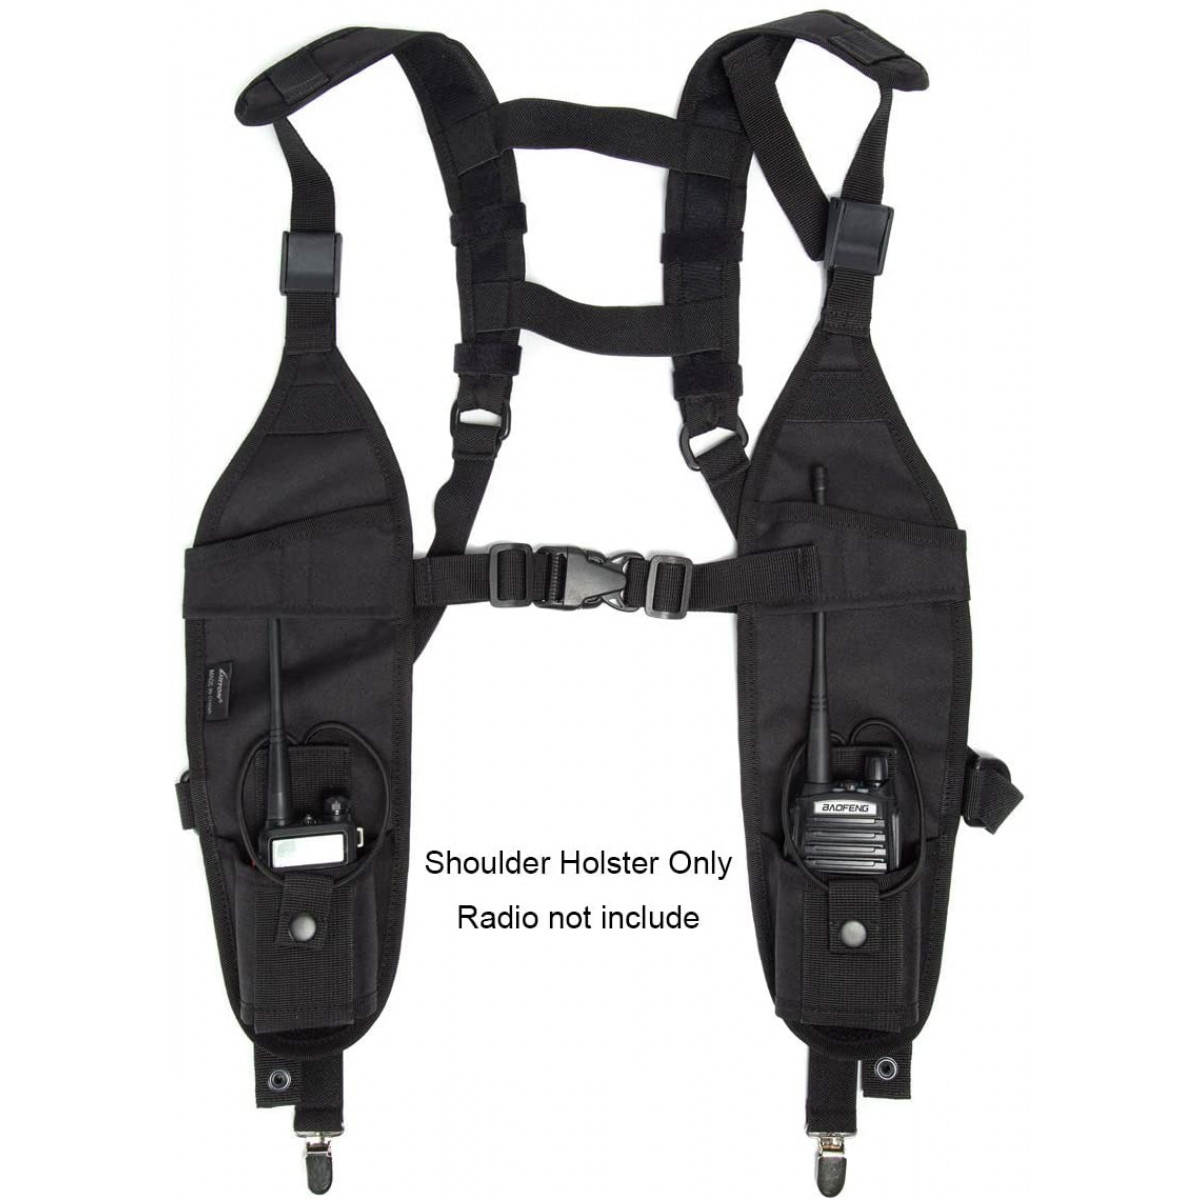 Universal Double Radio Shoulder Harness Holster Chest